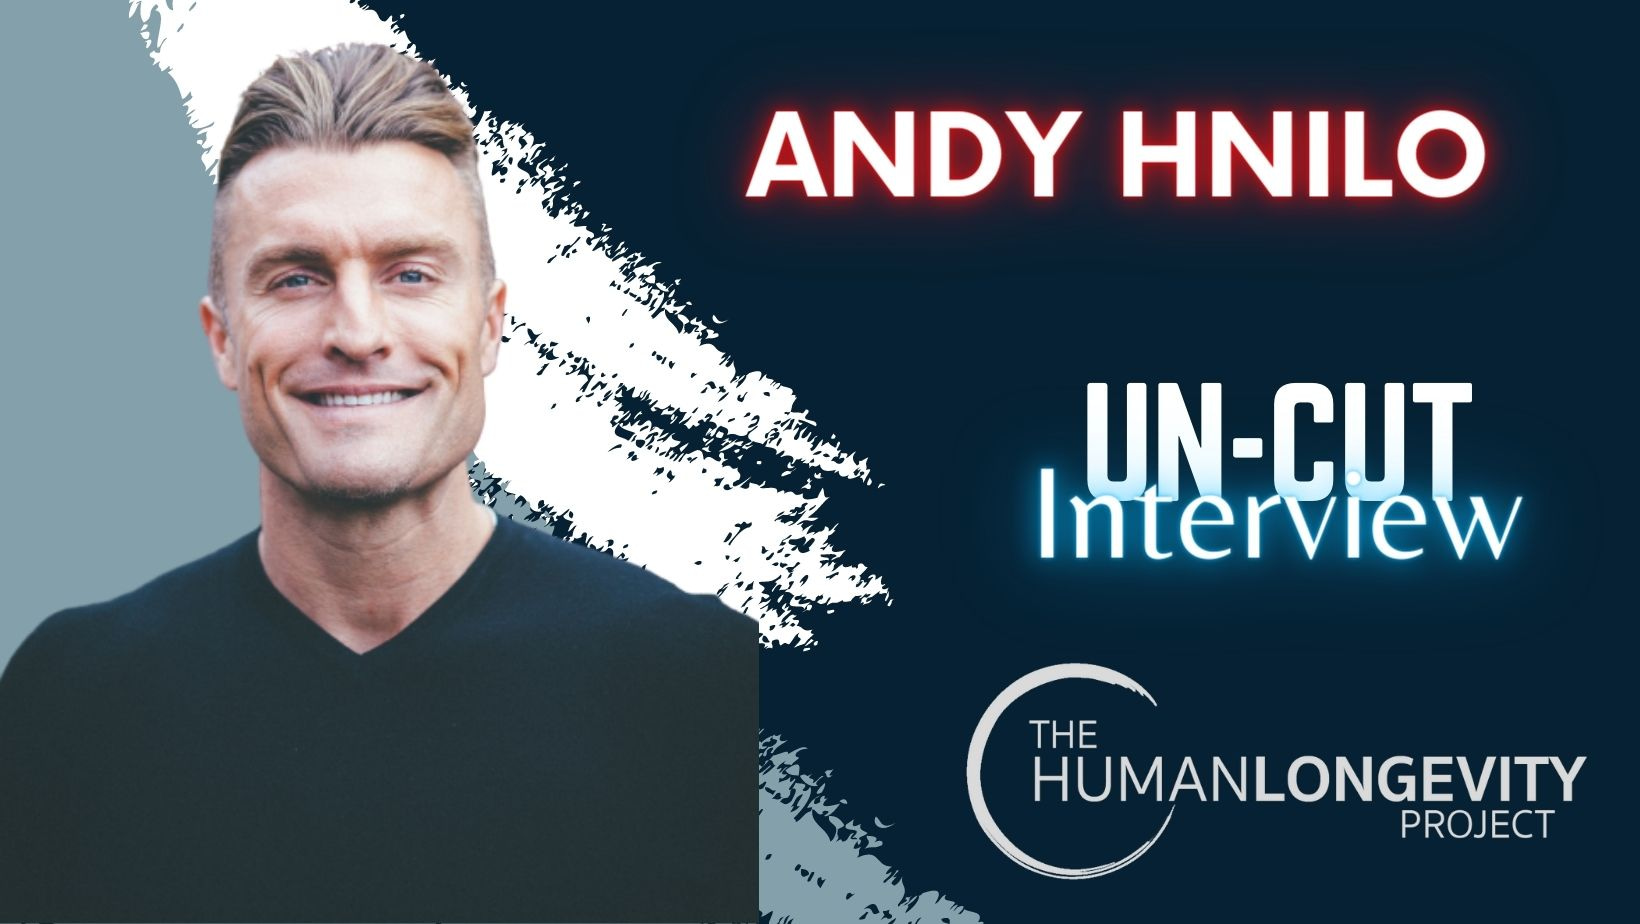 Human Longevity Project Uncut Interview With Andy Hnilo